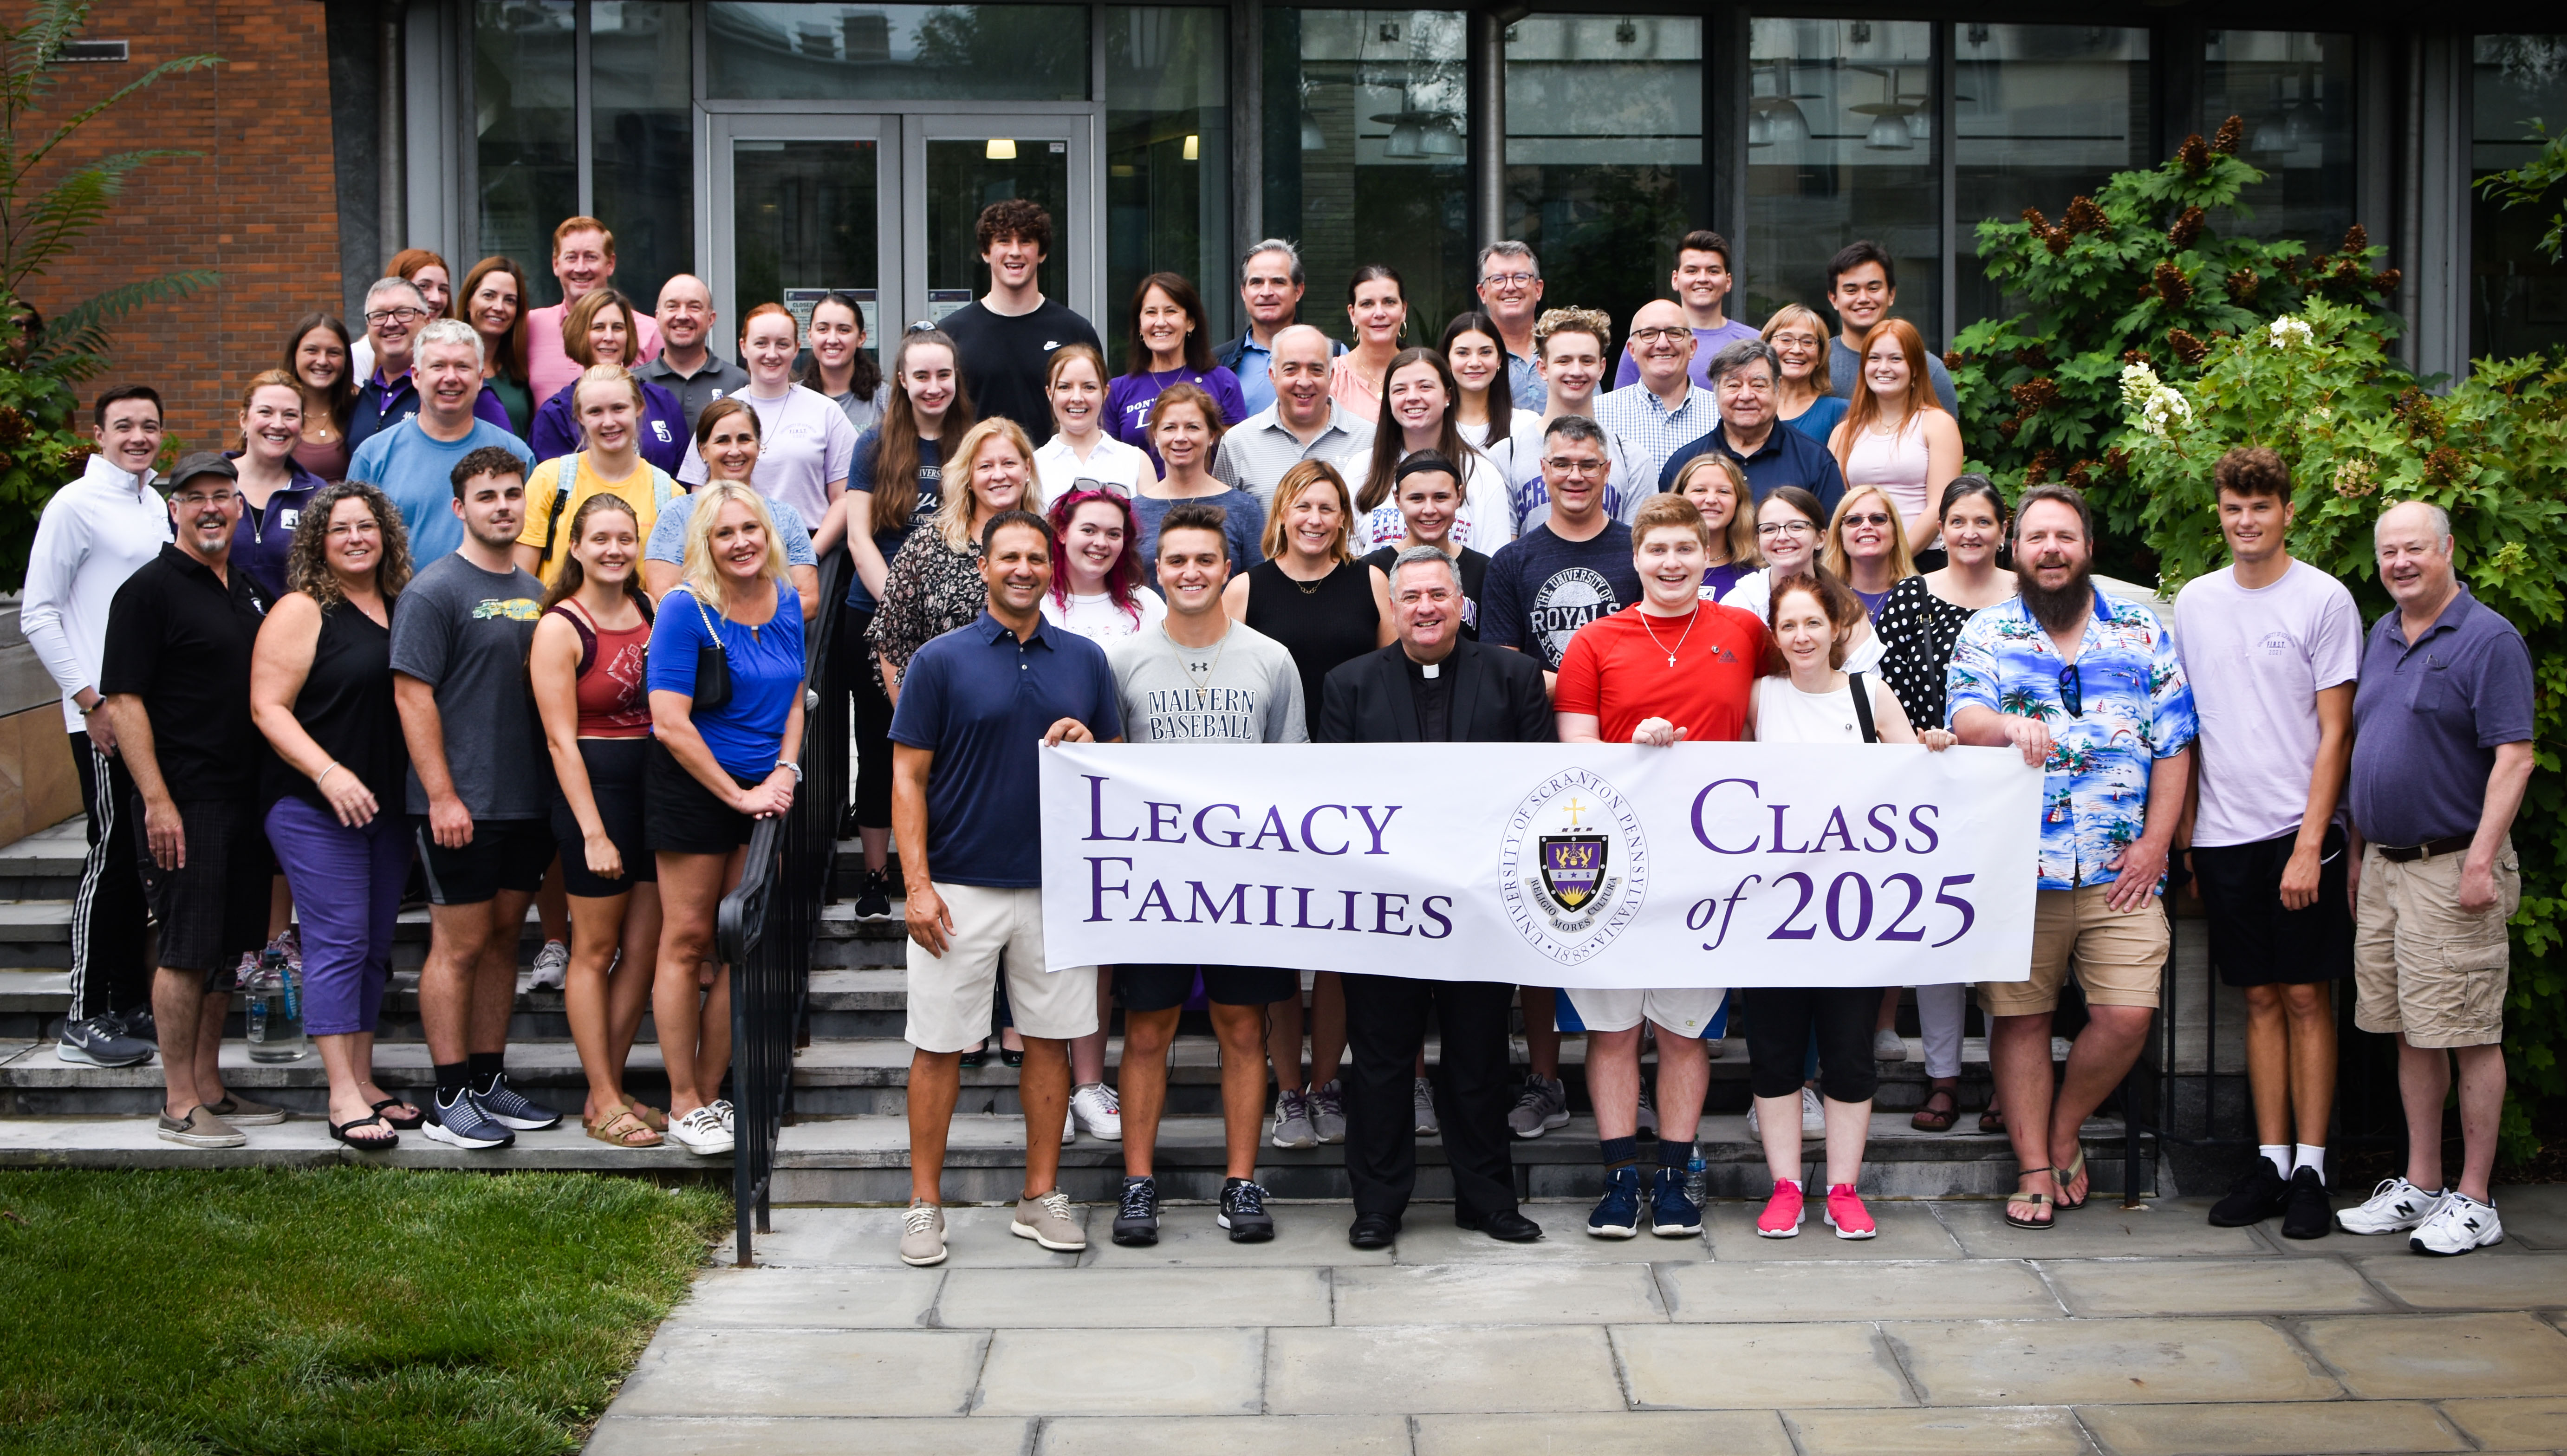 Class Of 2025 Legacy Families Launch Students' Scranton Careers